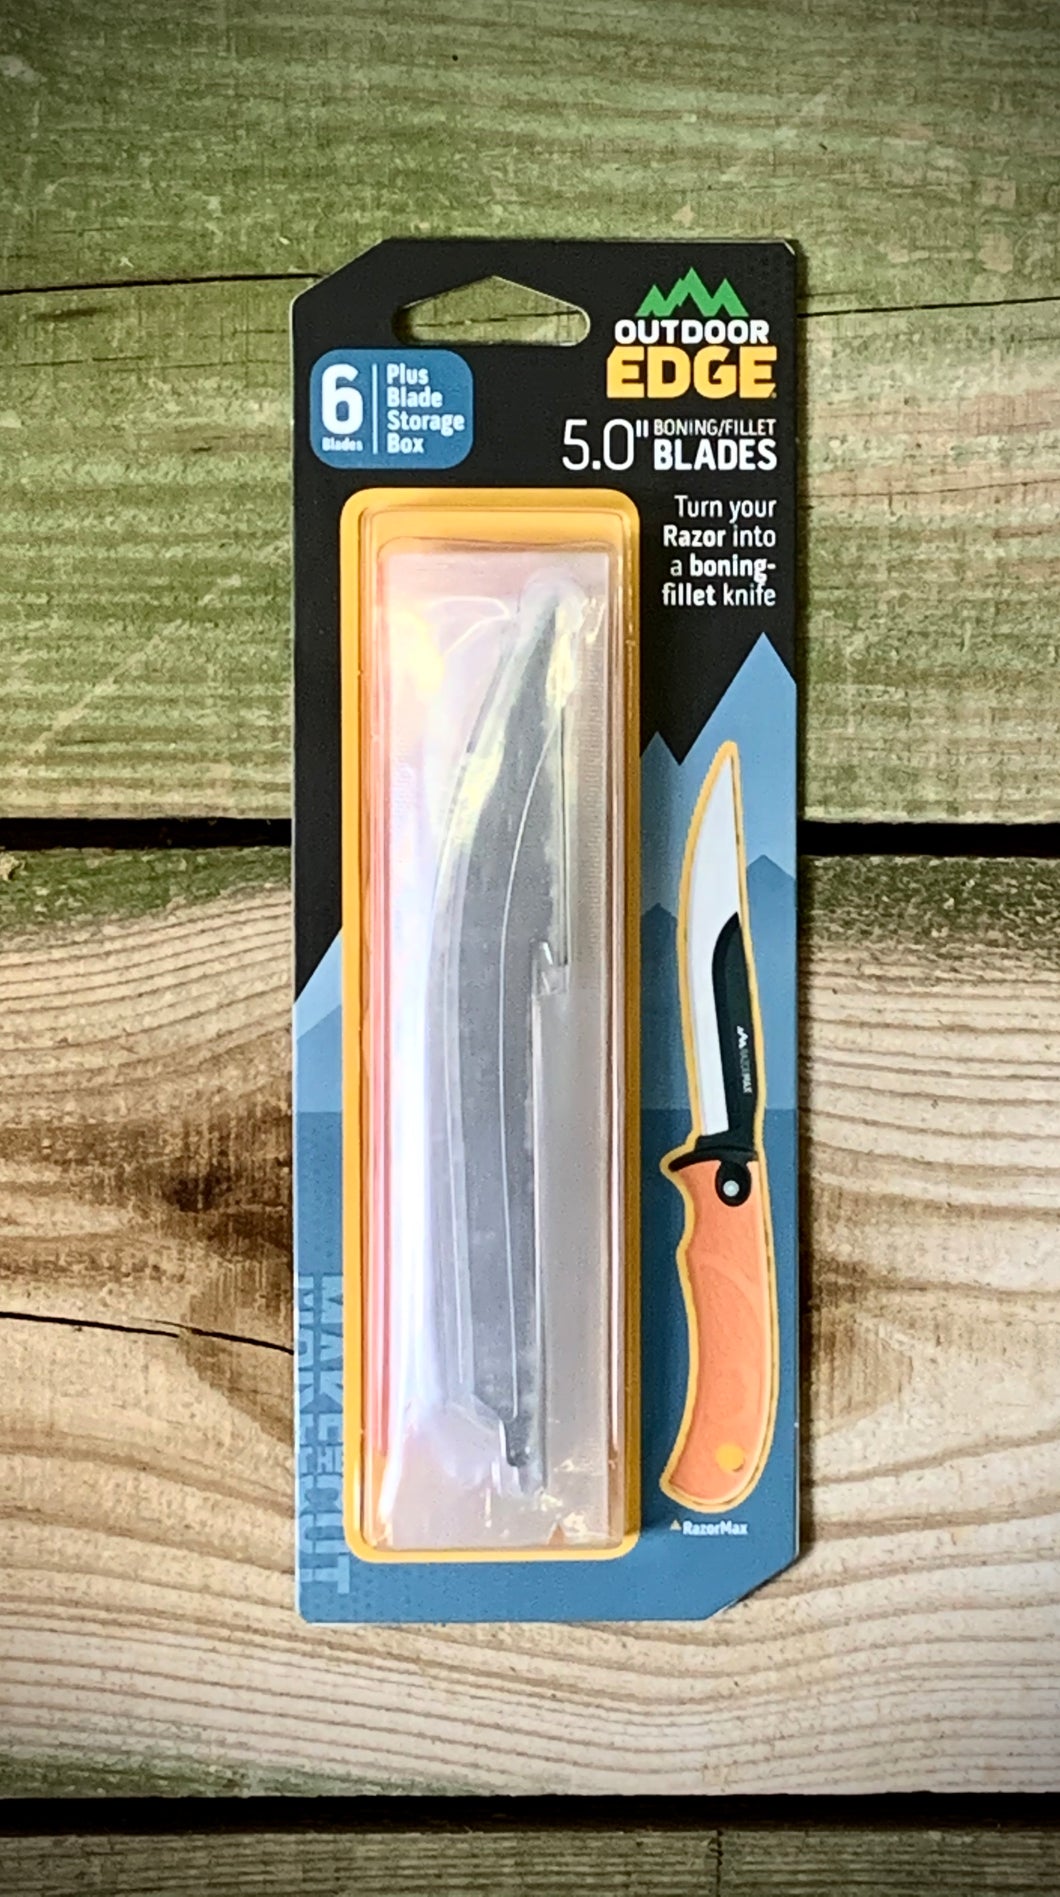 Outdoor Edge RazorSafe Drop Point Knife Replacement Blades